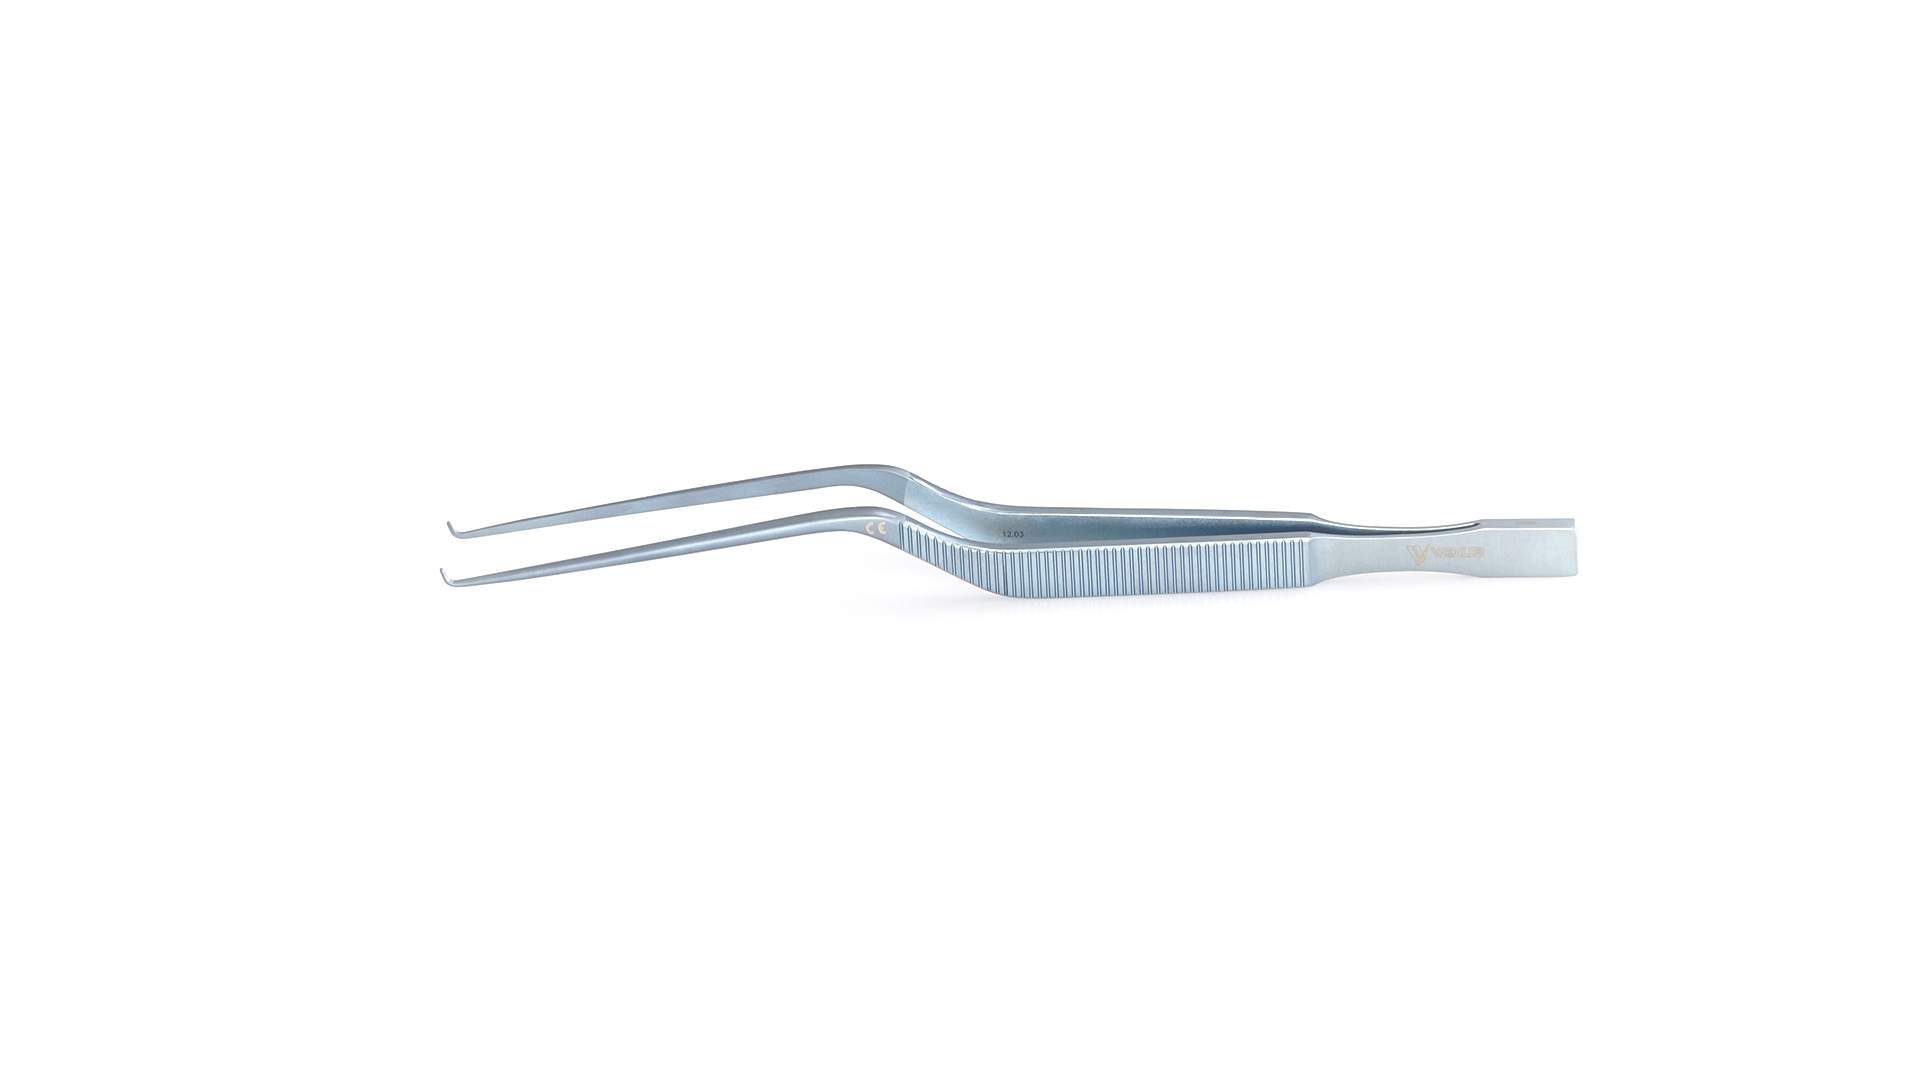 Micro Forceps - Angled 90° Up 0.75mm blunt tips